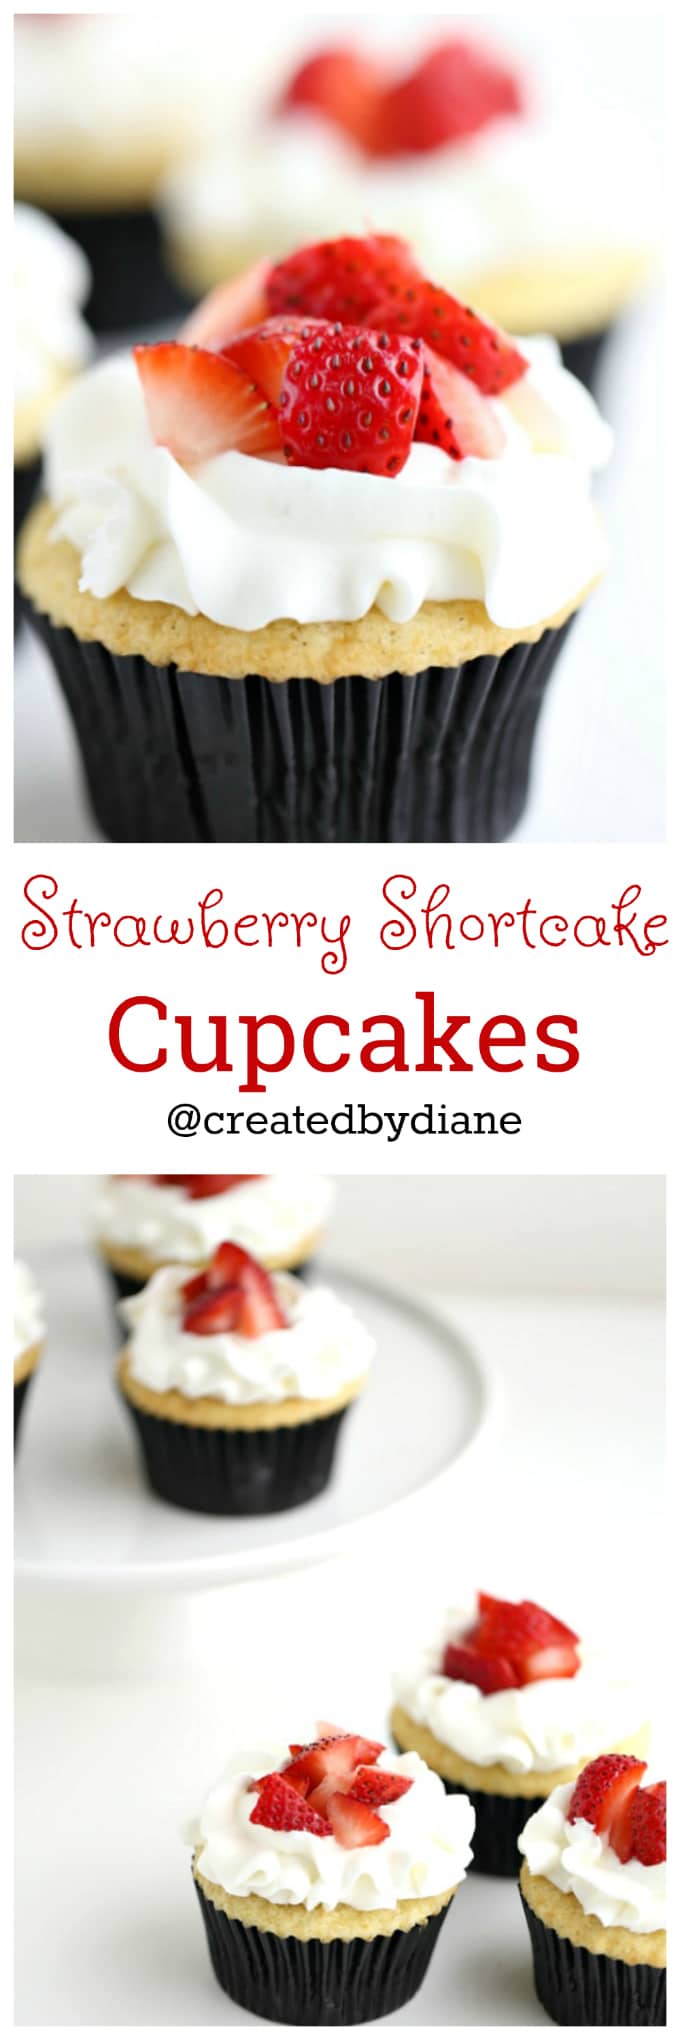 Strawberry Shortcake Cupcakes | Created by Diane